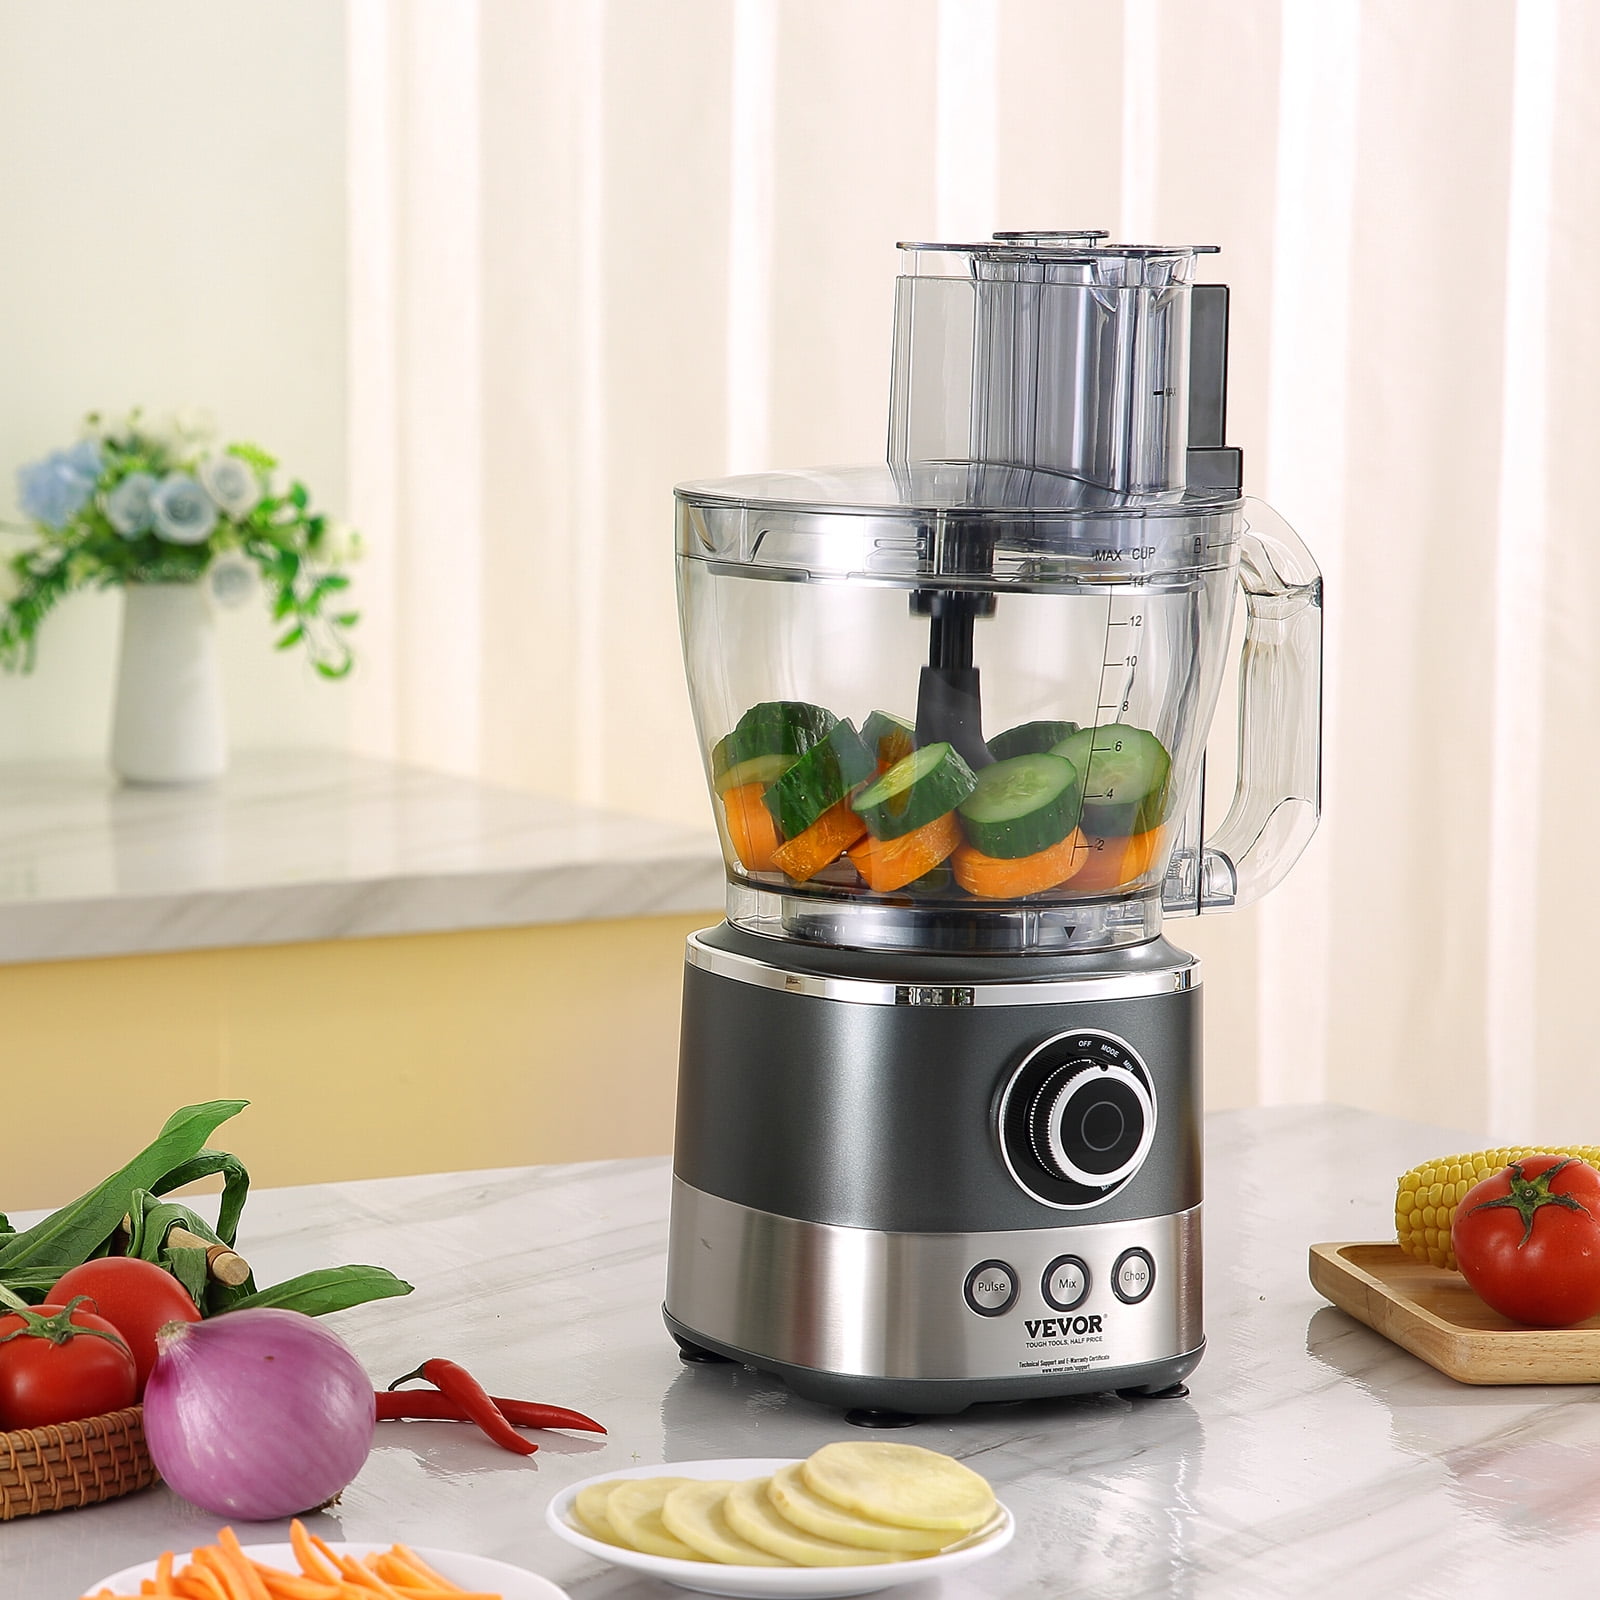 Hamilton Beach Food Processor & Vegetable Chopper for Slicing, Shredding,  Mincing, and Puree, 10 Cups + Easy Clean Bowl Scraper, Stainless Steel  (70730)